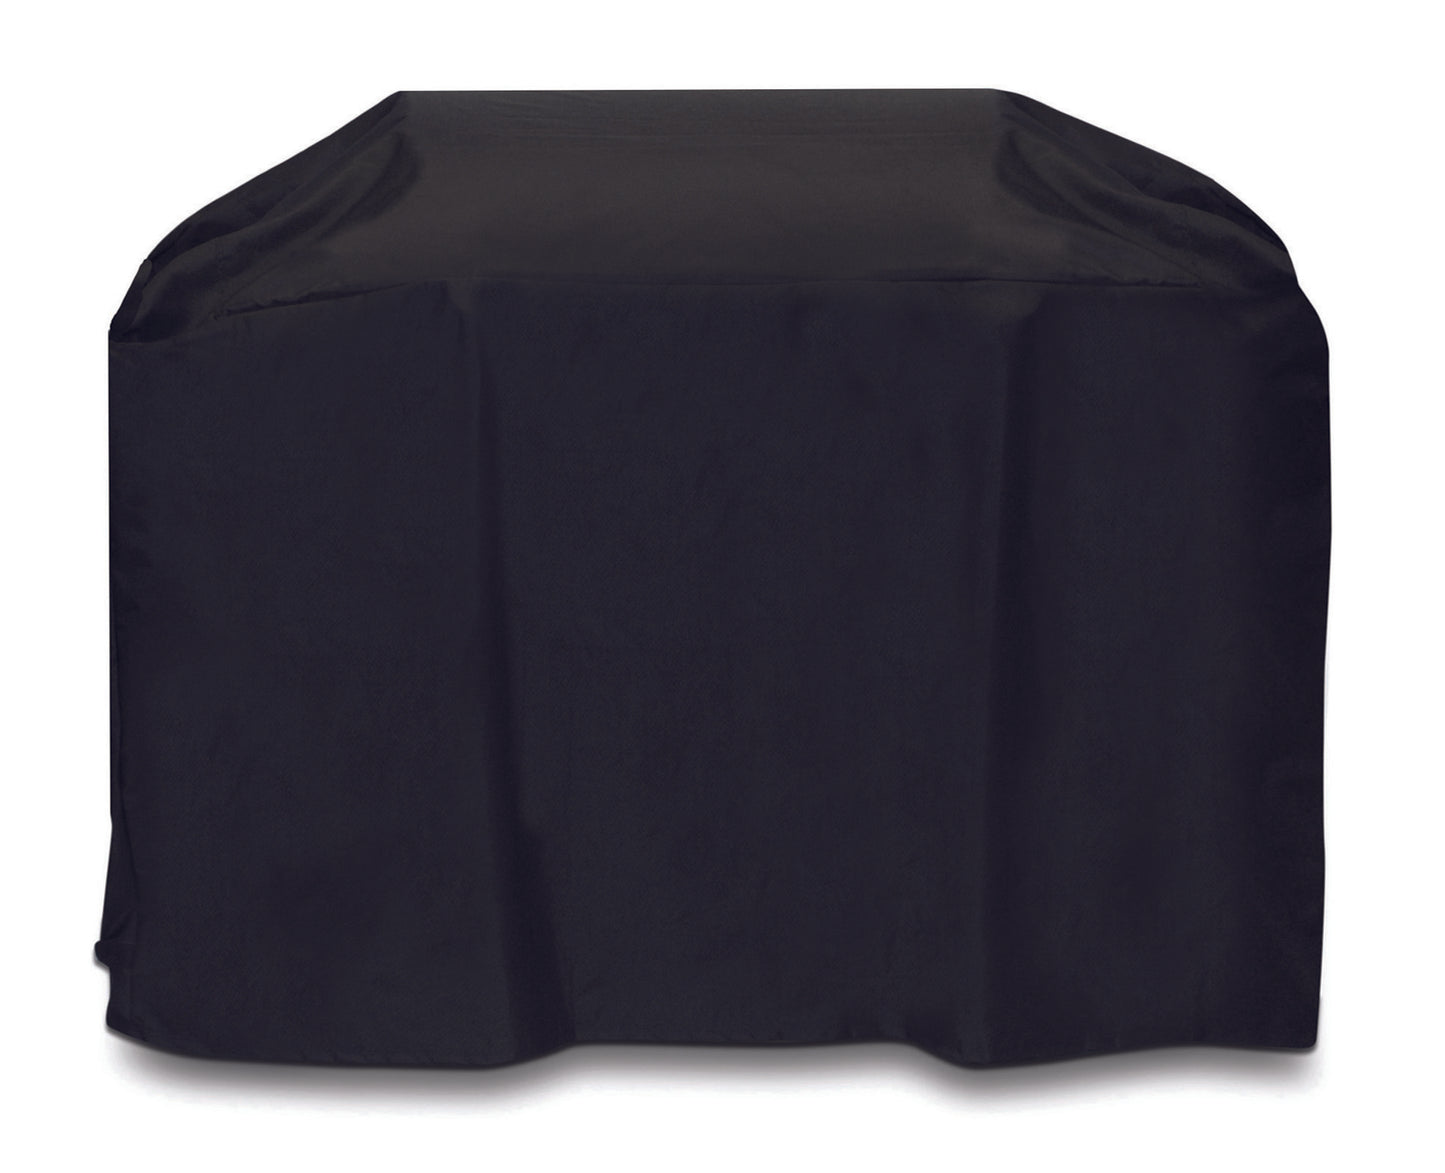 Cart-Style 72" Grill Cover (Black or Khaki)